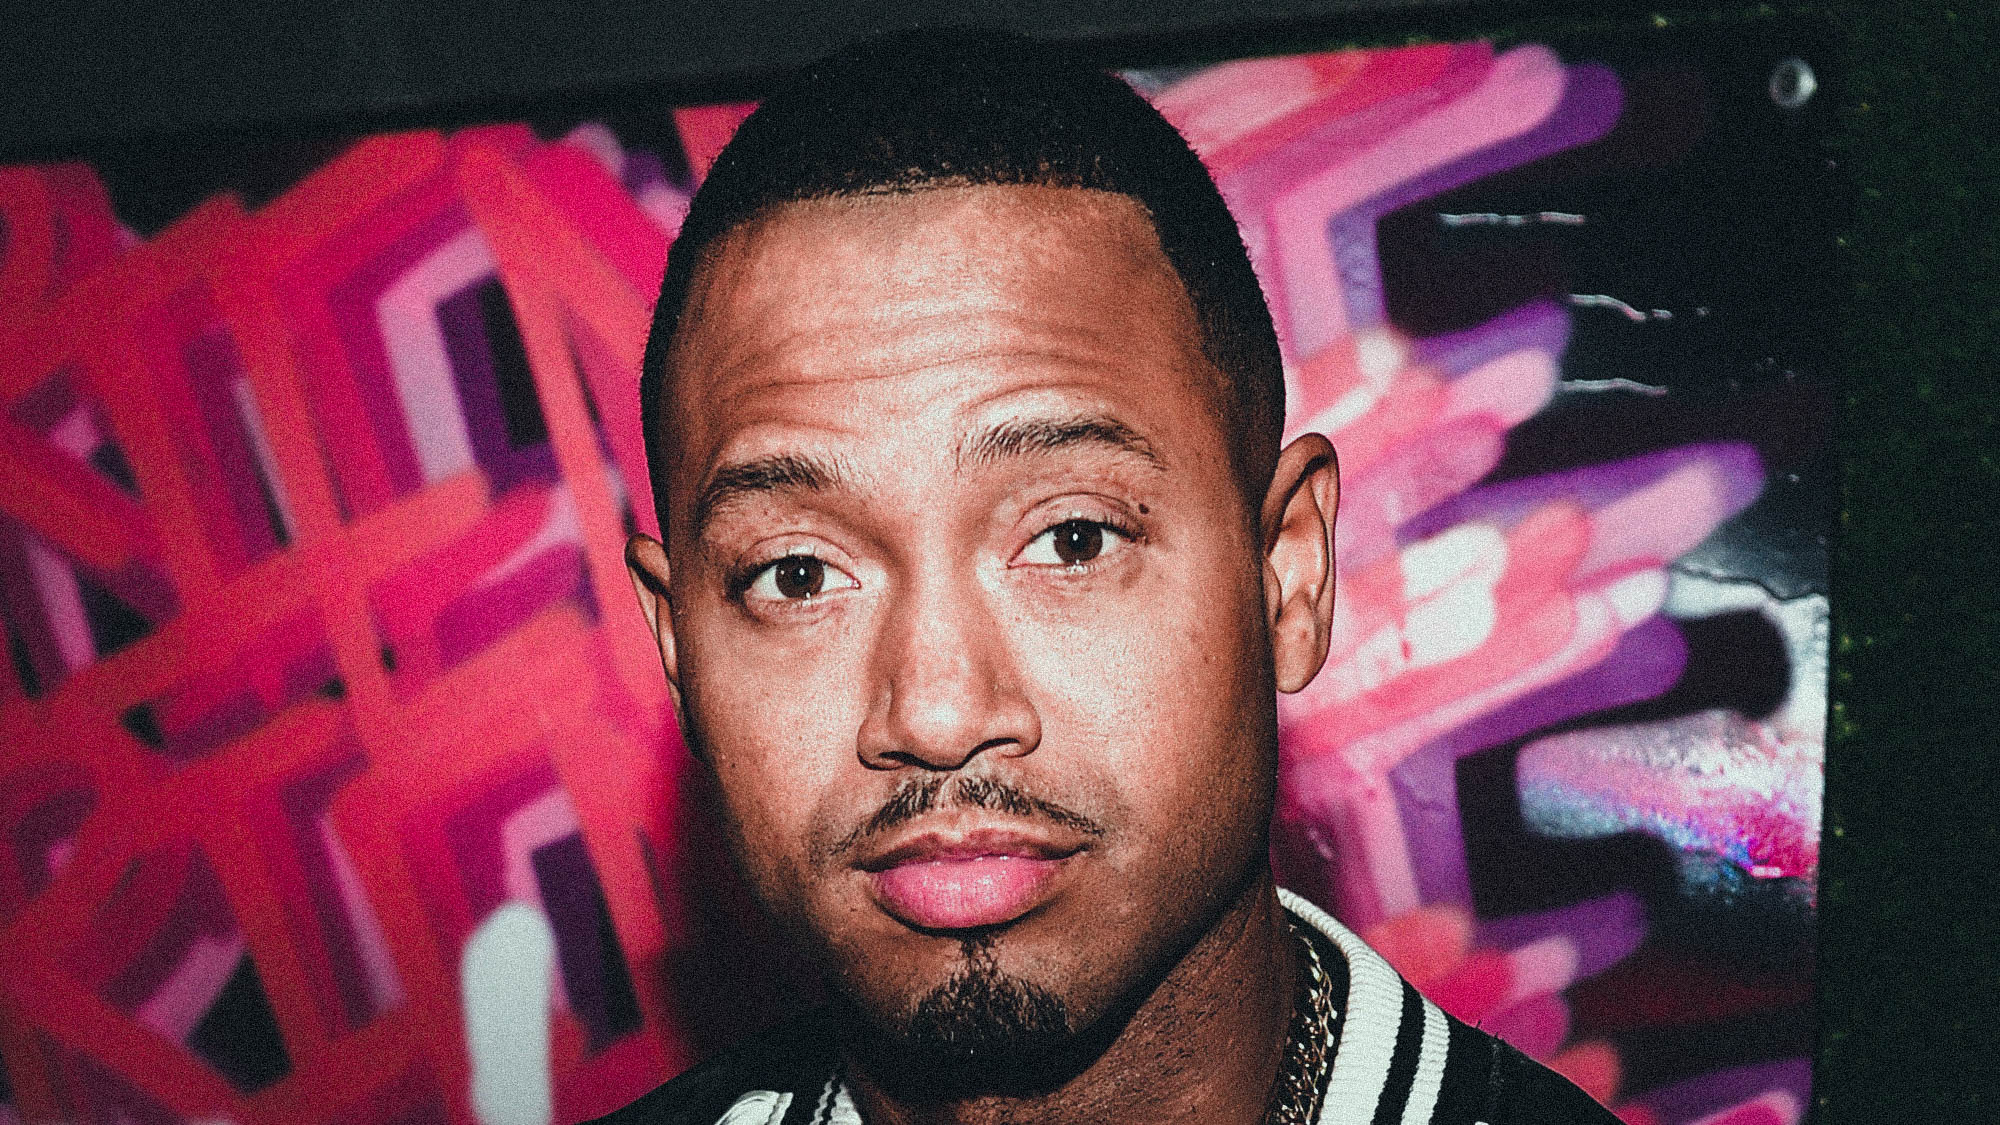 Actor Terrence J shot at in Los Angeles